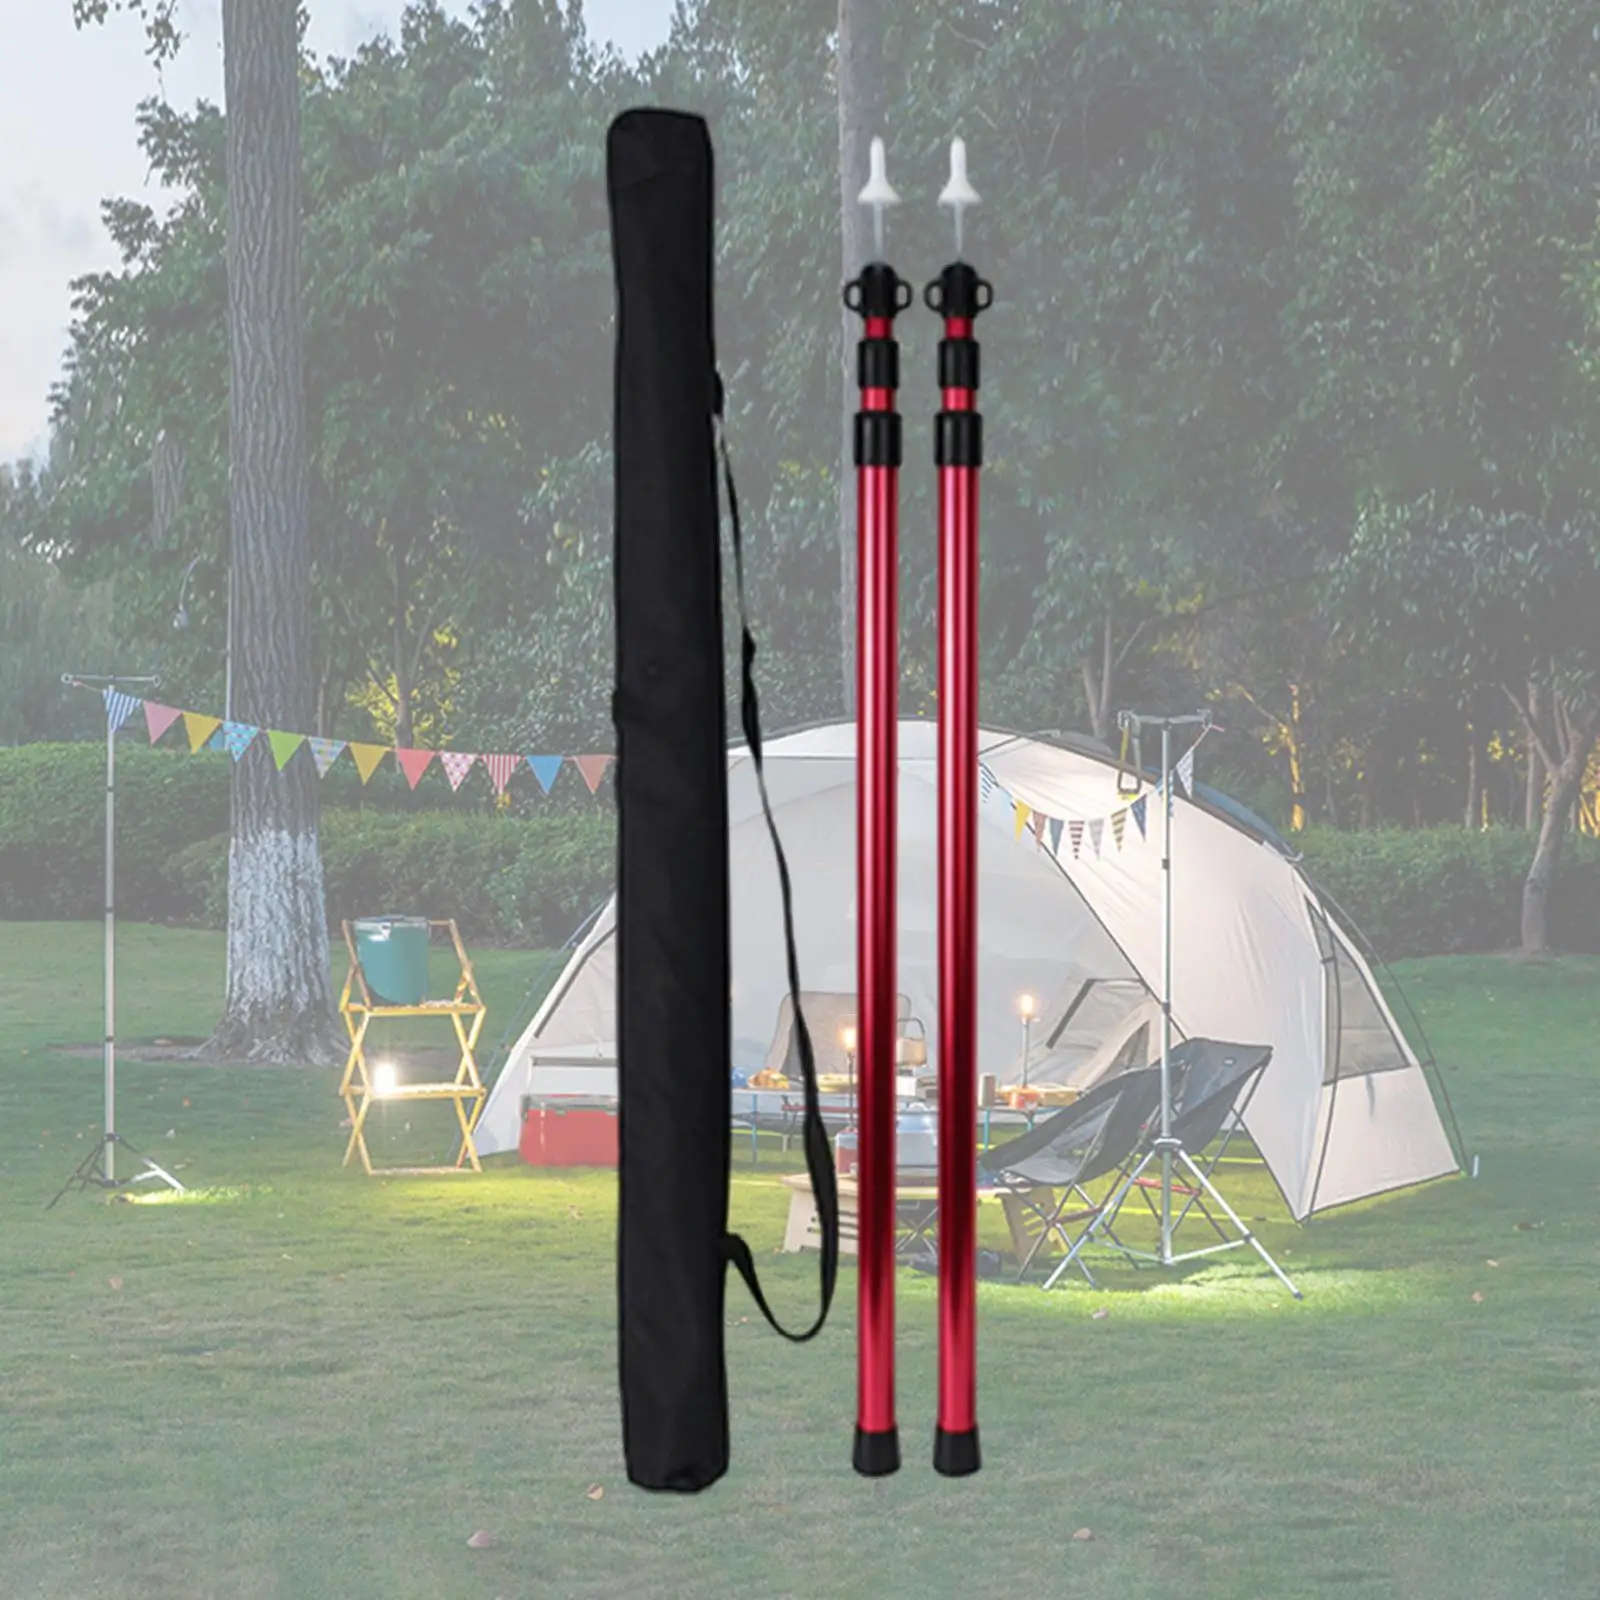 Awning Poles Camping Top 2x Telescoping Tarp Poles Adjustable for Traveling Hiking